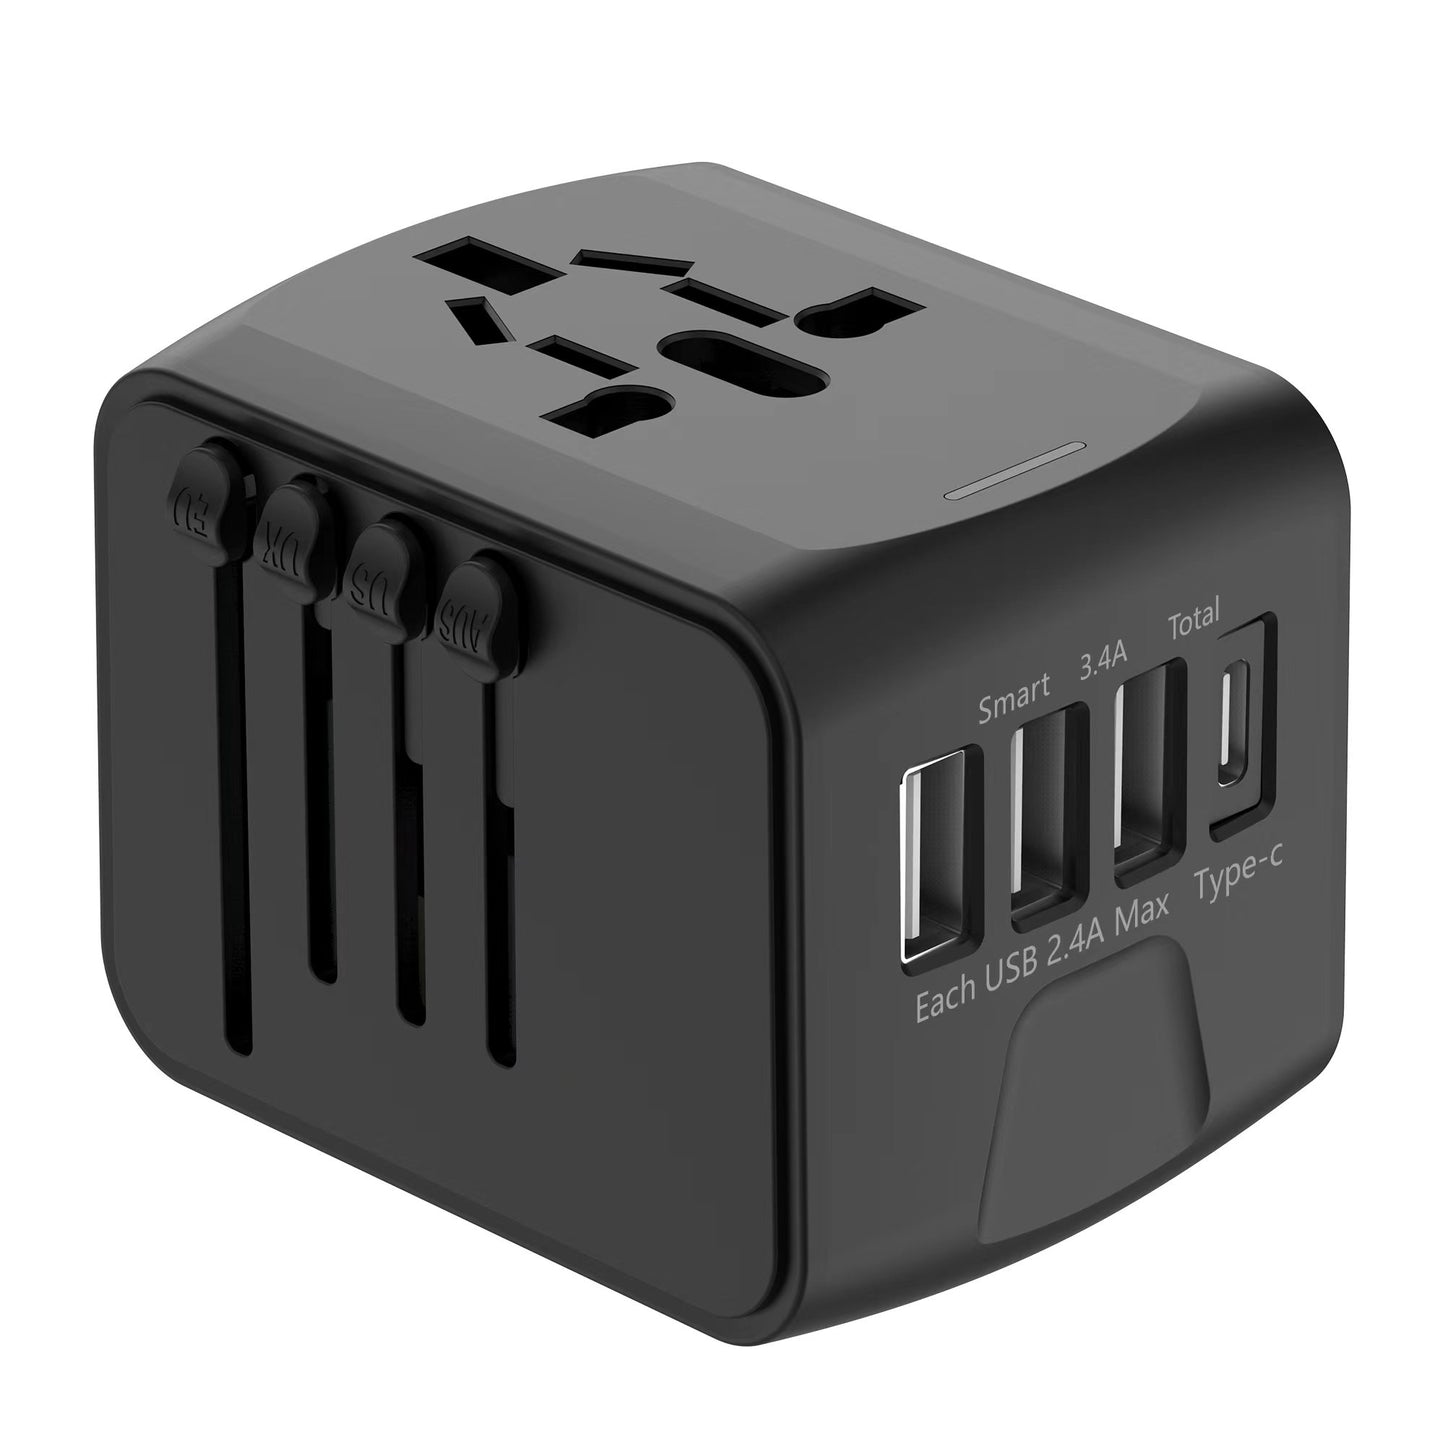 JMFONE Universal International Travel Power Adapter W/High Speed 2.4A USB, 3.0A Type-C Wall Charger, European Adapter, Worldwide AC Outlet Plugs Adapters for Europe, UK, US, AU, Asia